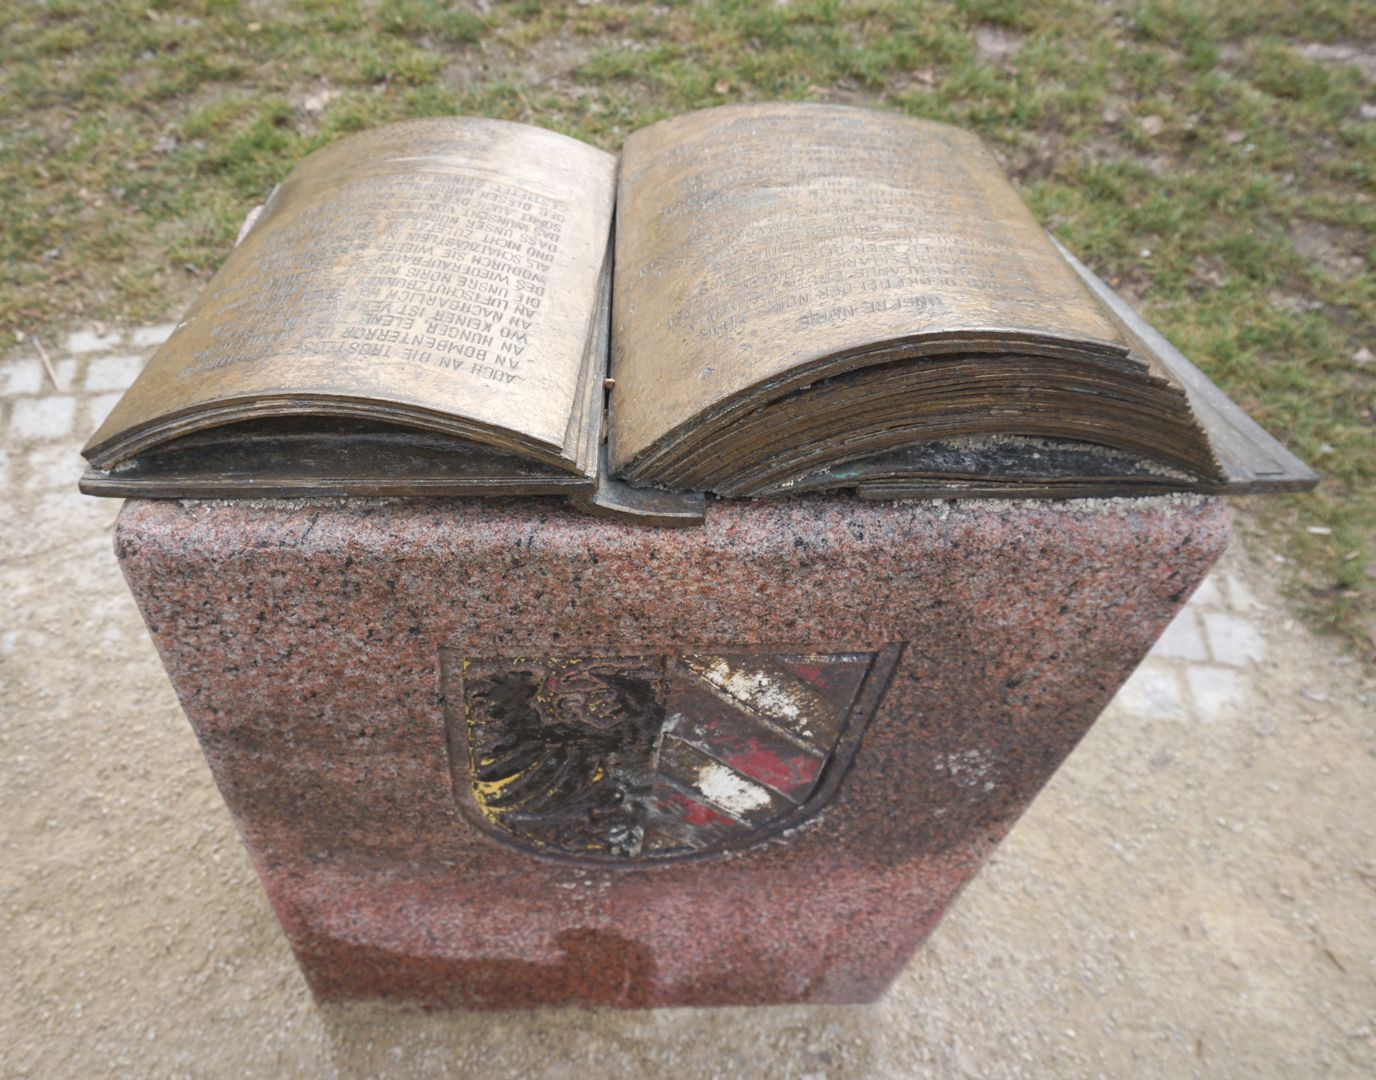 Noris Fountain Unbinding bronze book with donor's dedication on a stone desk with the city's coat of arms